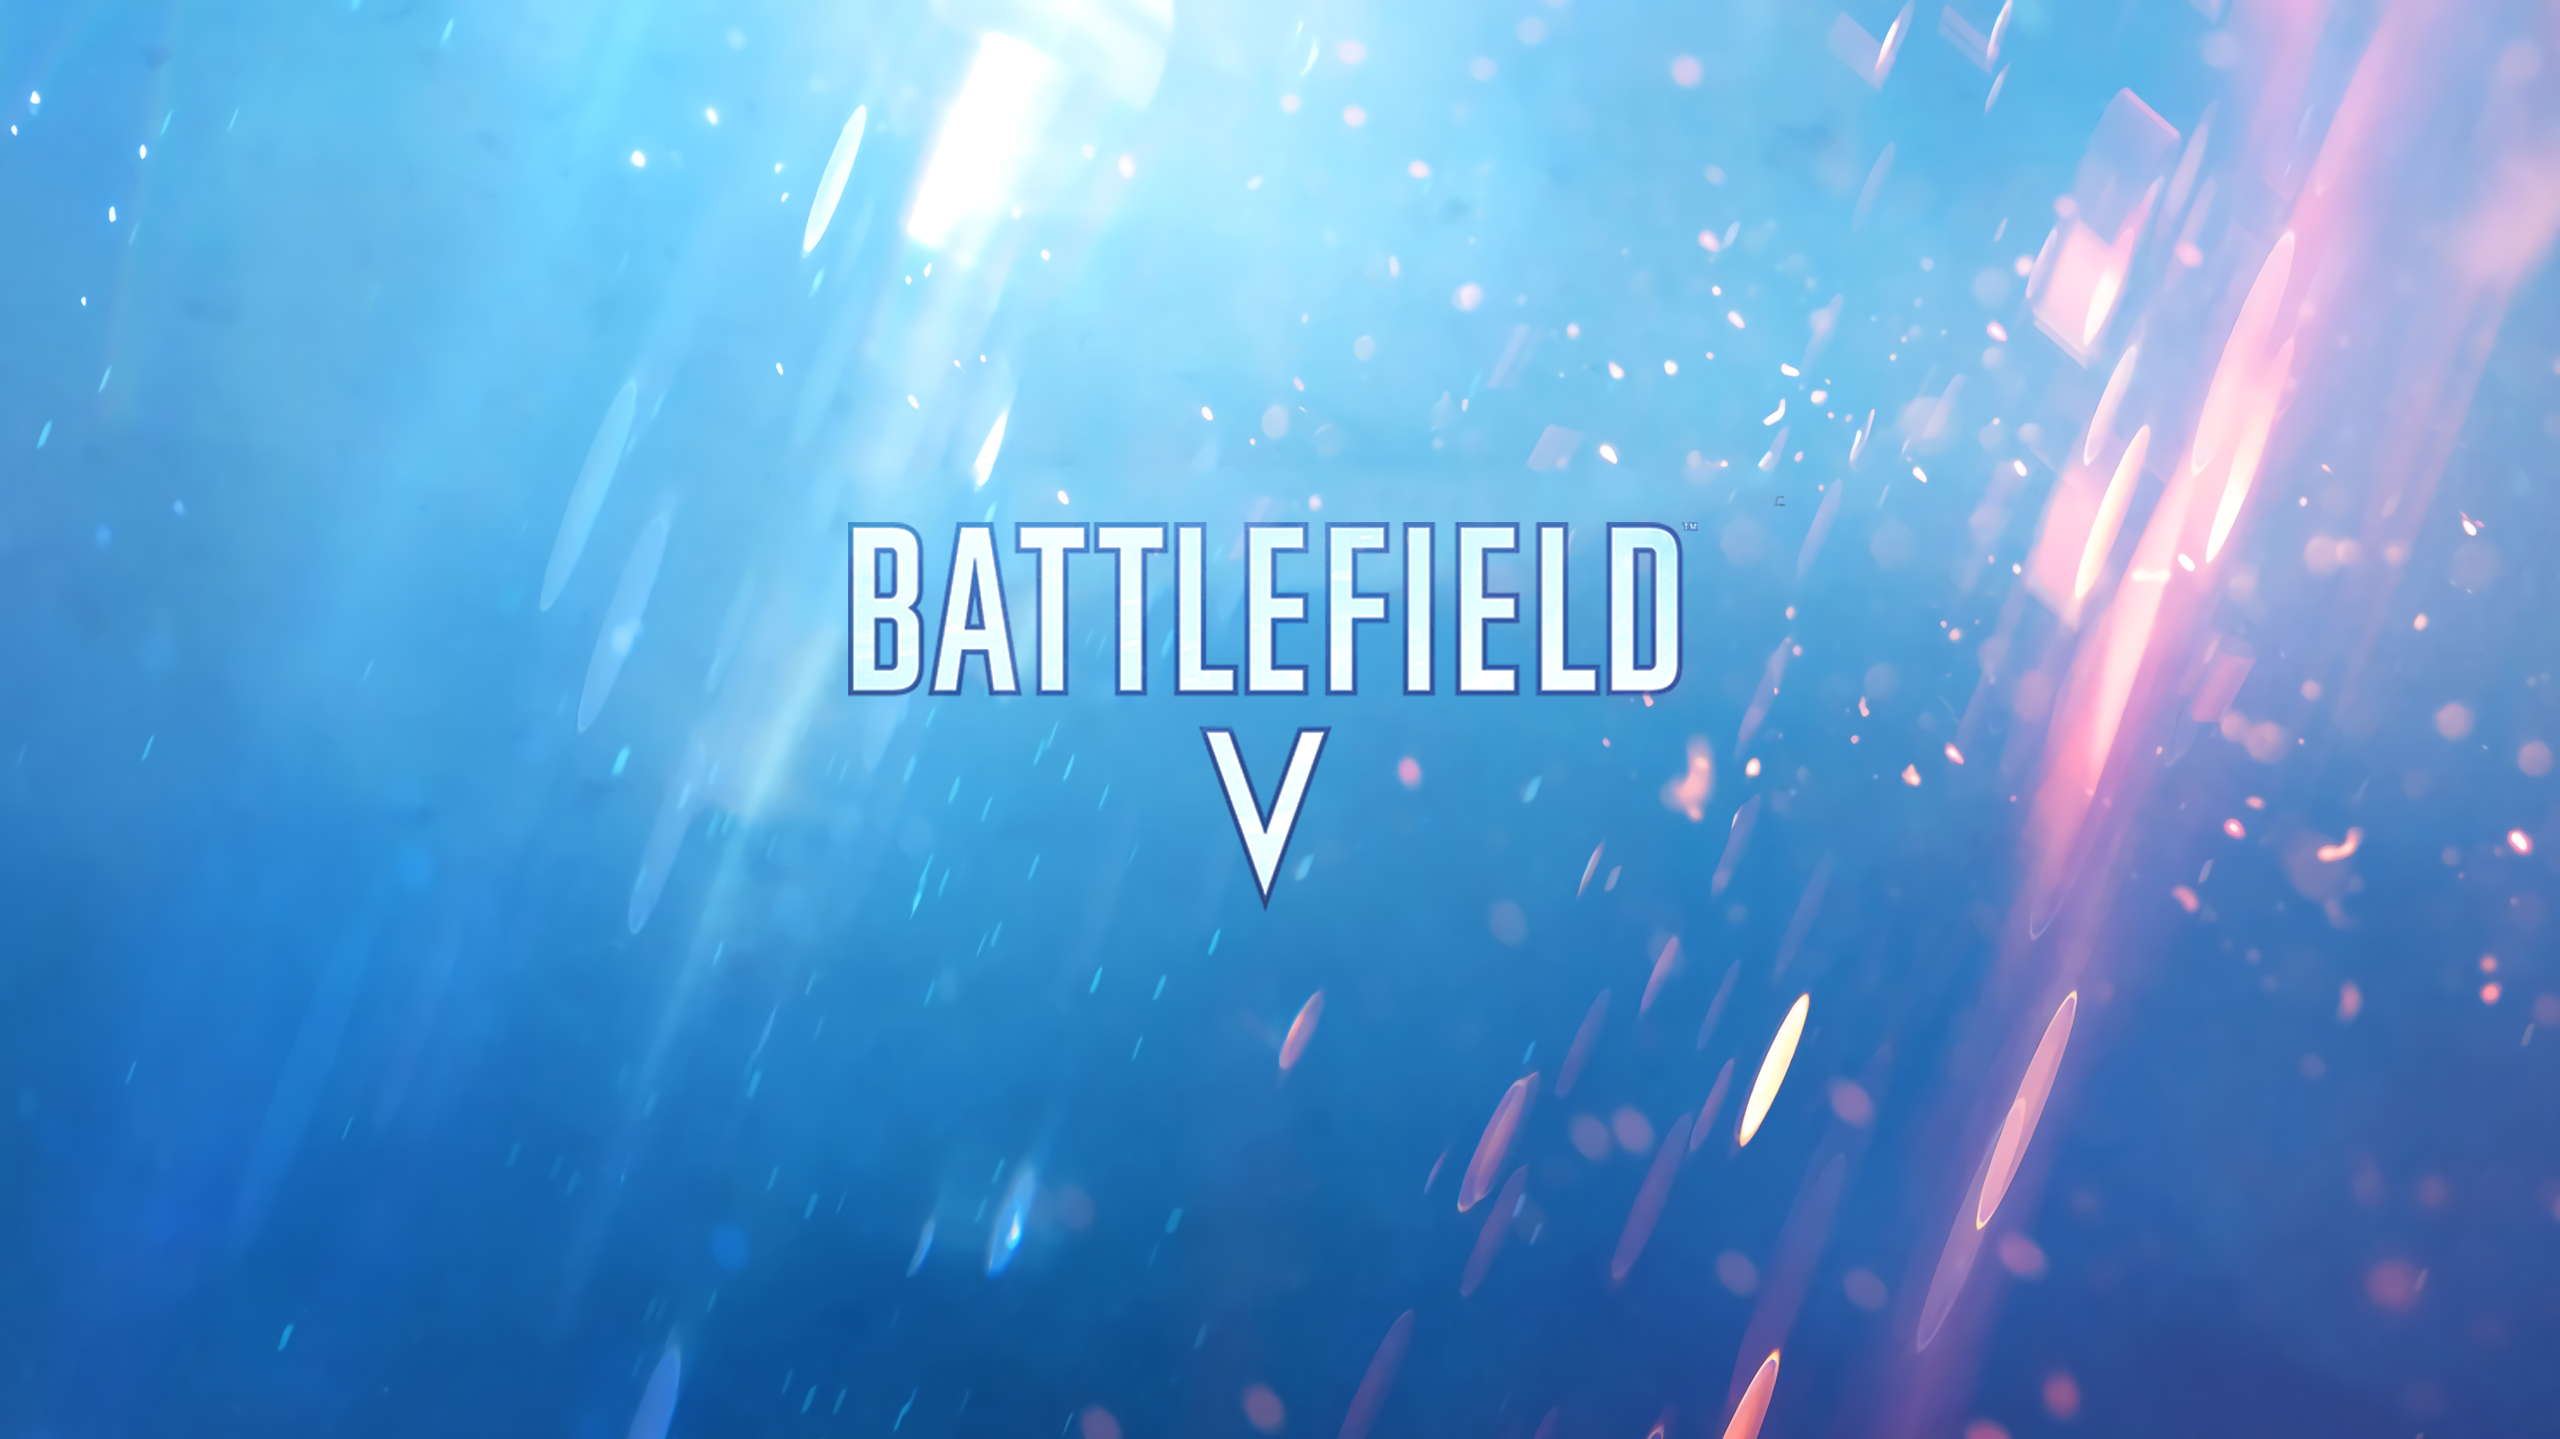 Battlefield V 4k wallpaper made from images downloaded from the